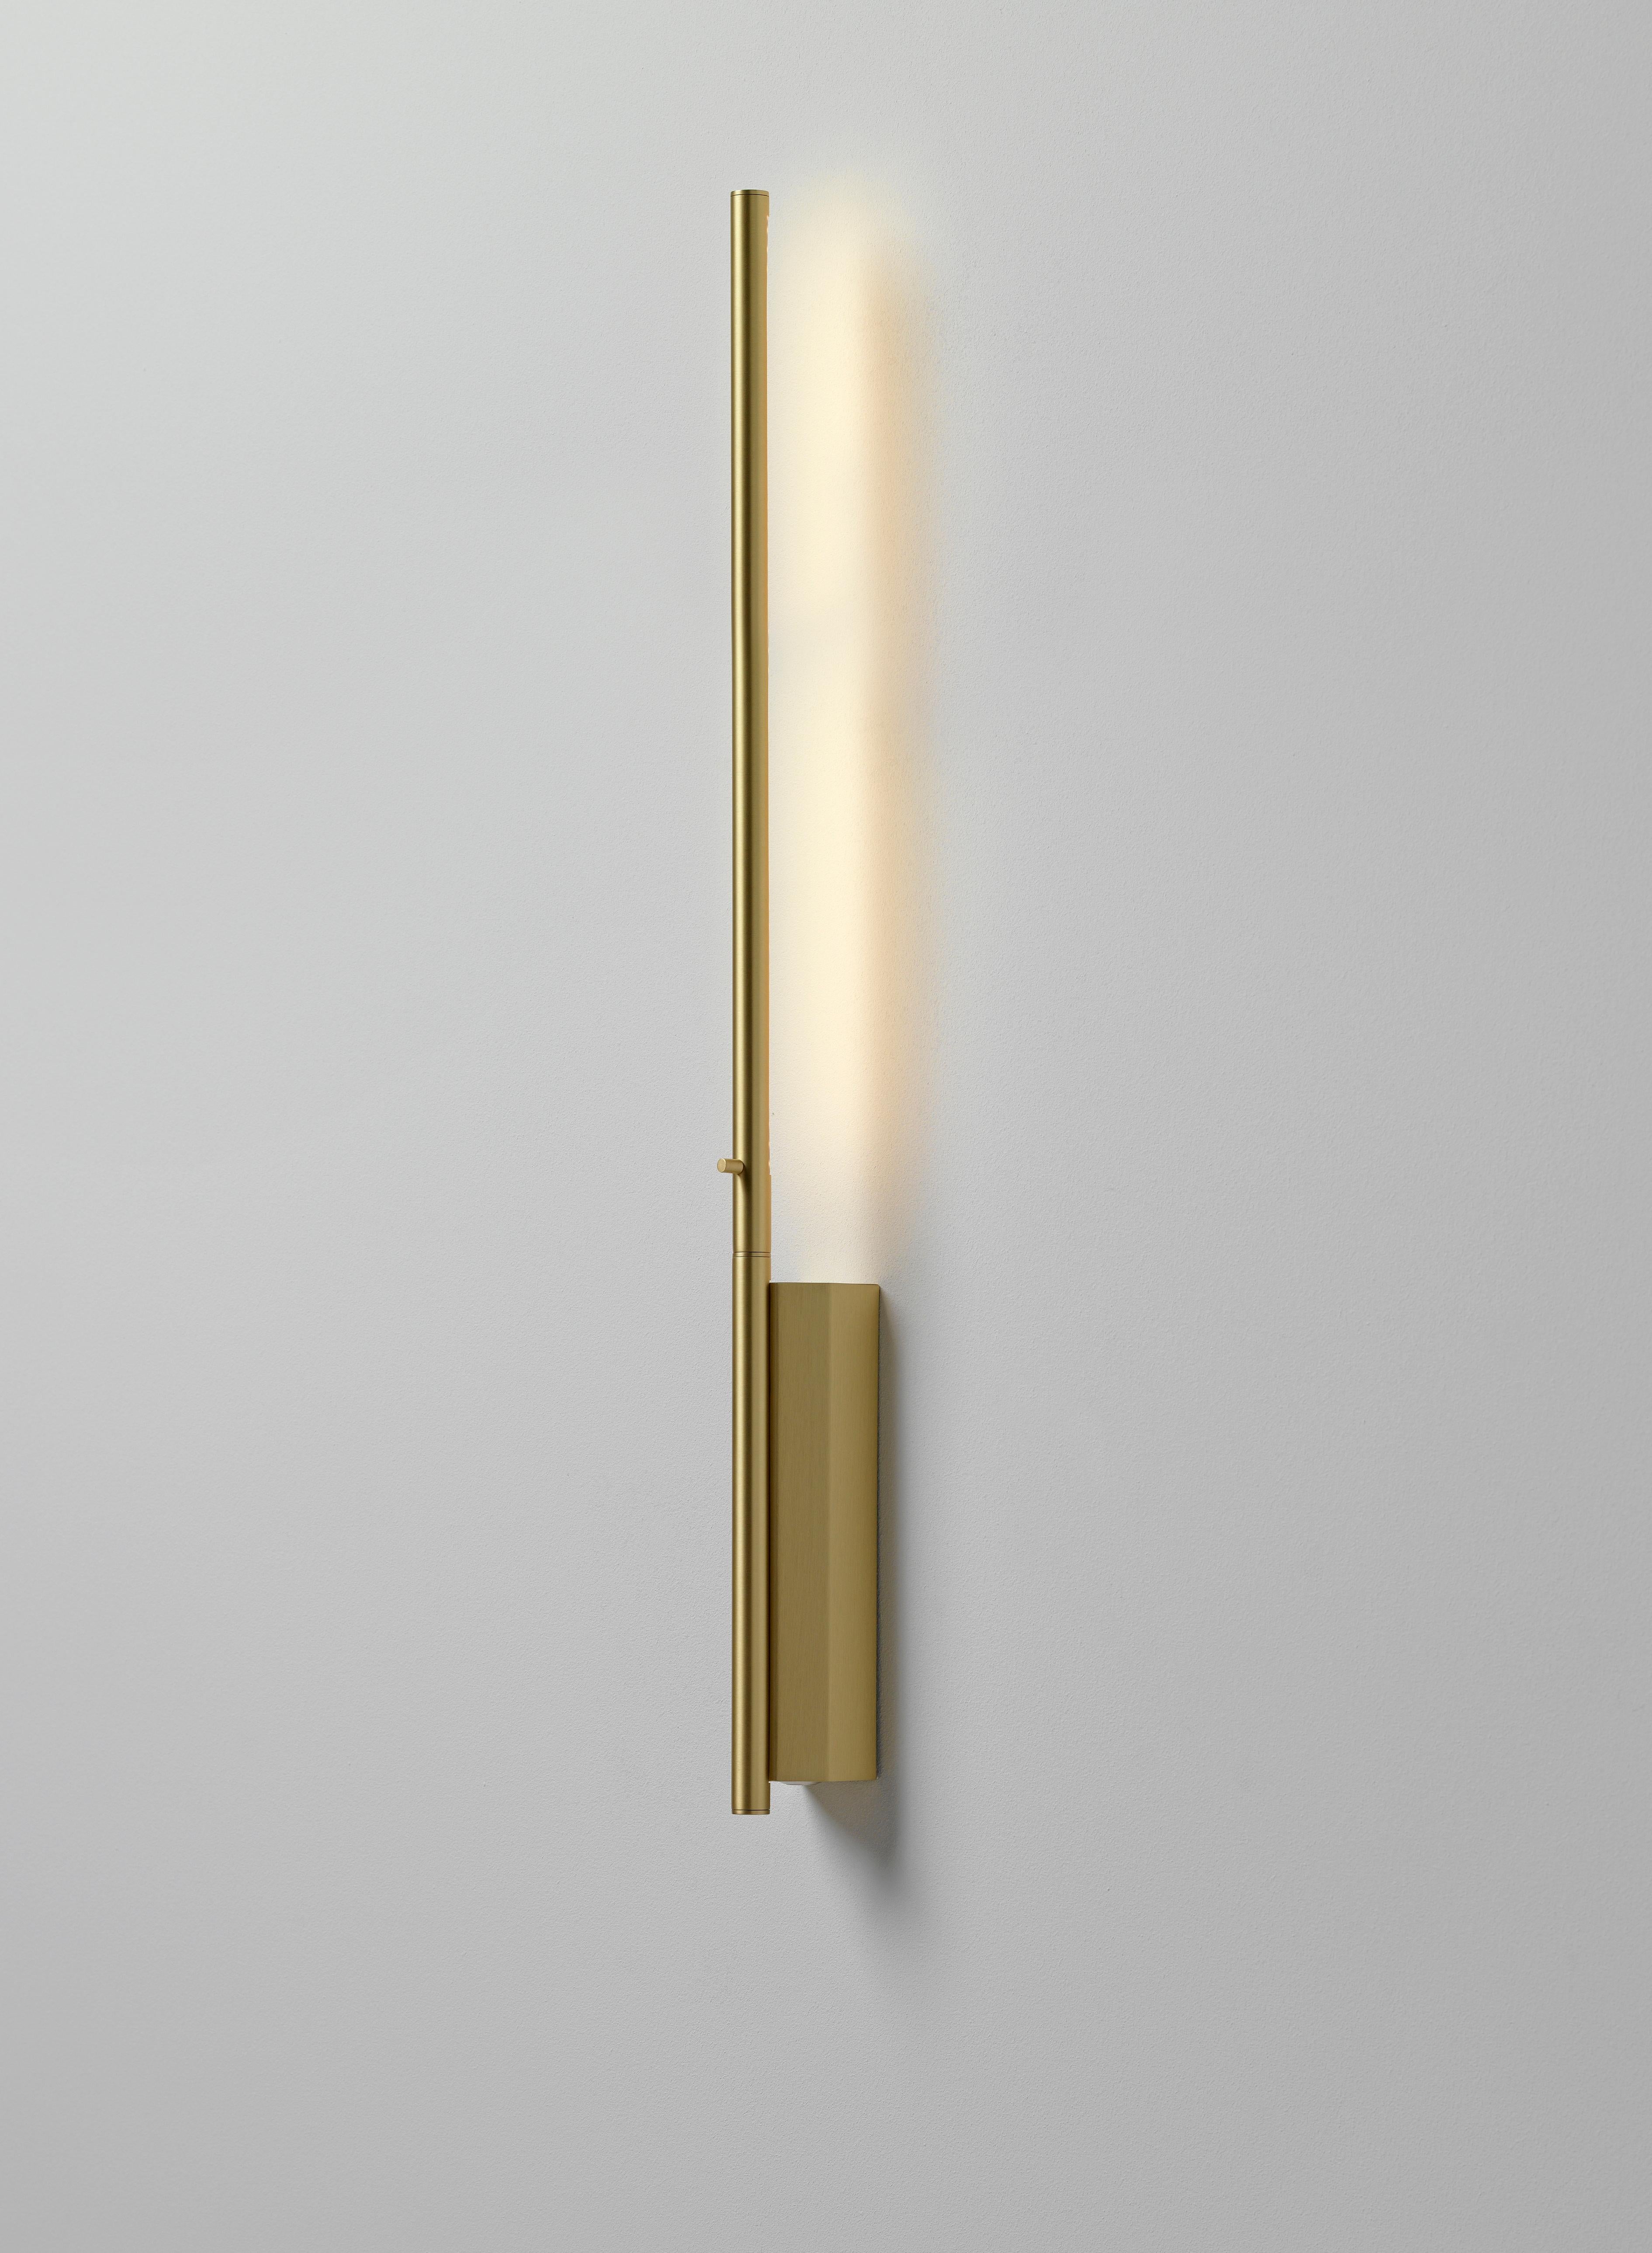 IP Link 580 Polished brass wall light by Emilie Cathelineau
Dimensions: D4.5 x W5 x H58 cm
Materials: Solid brass, Polished Brass, LED, Polycarbonate.
Others finishes and dimensions are available.

All our lamps can be wired according to each